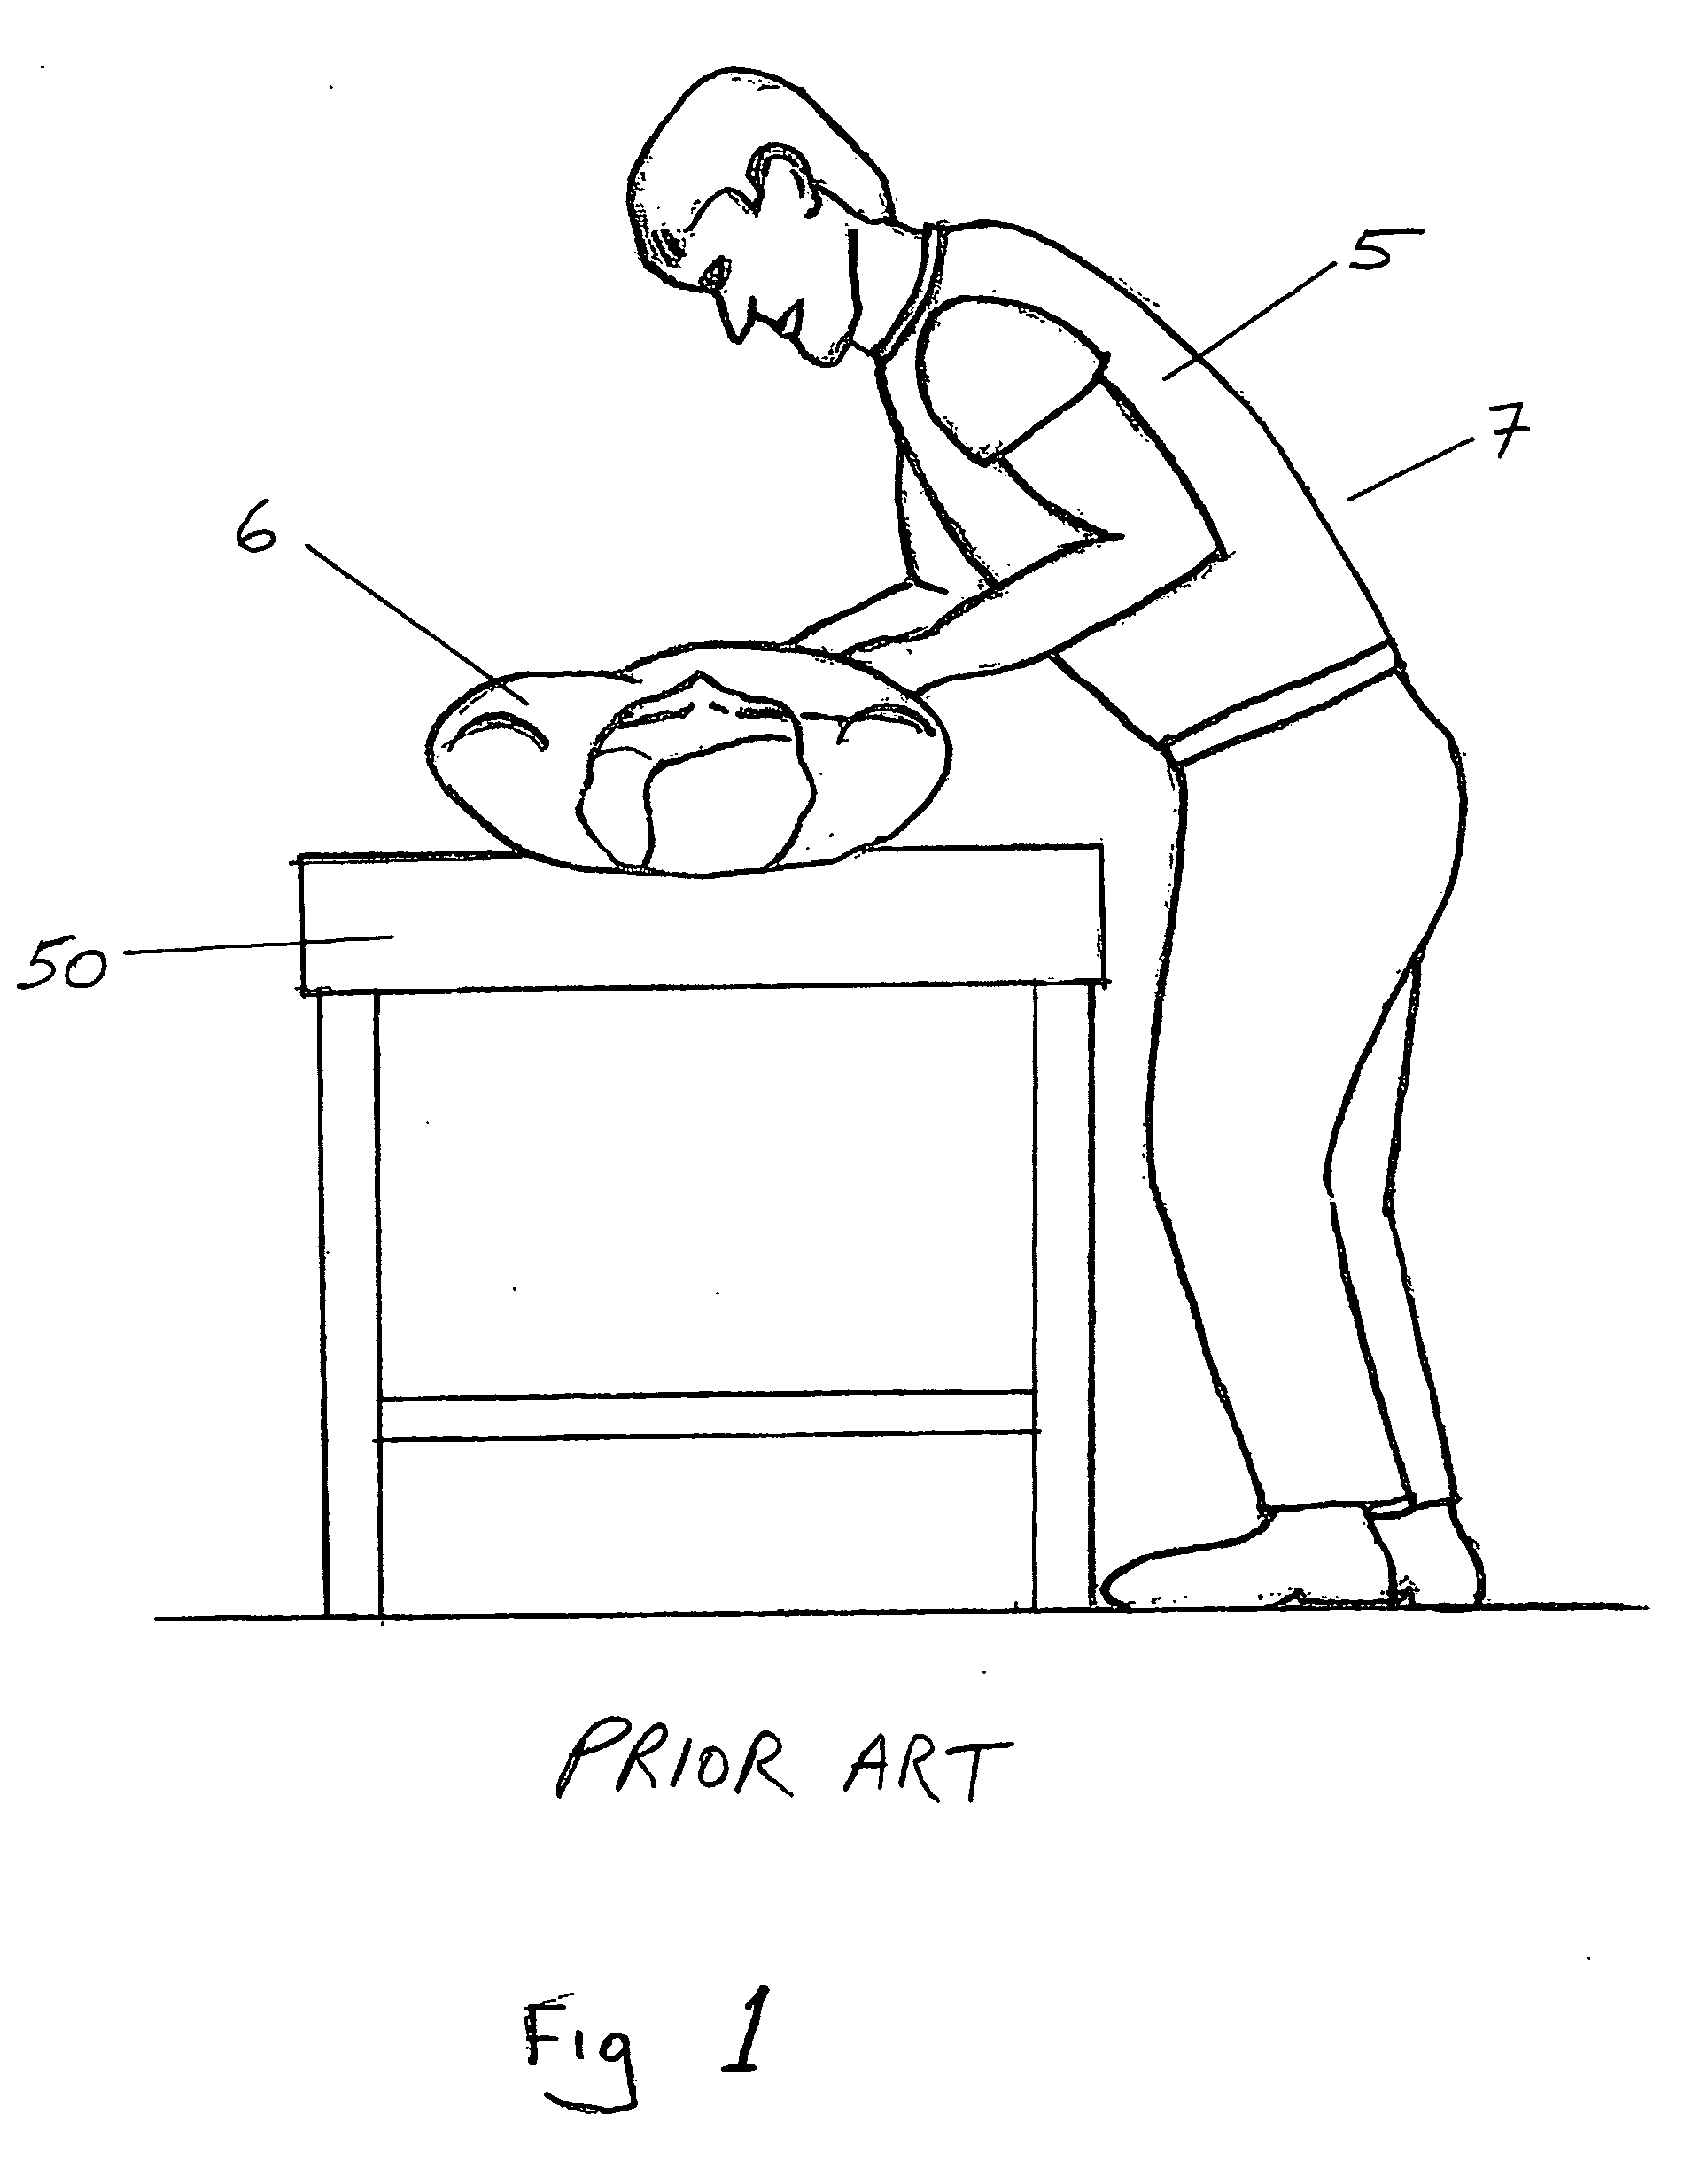 Upper-body support device and method